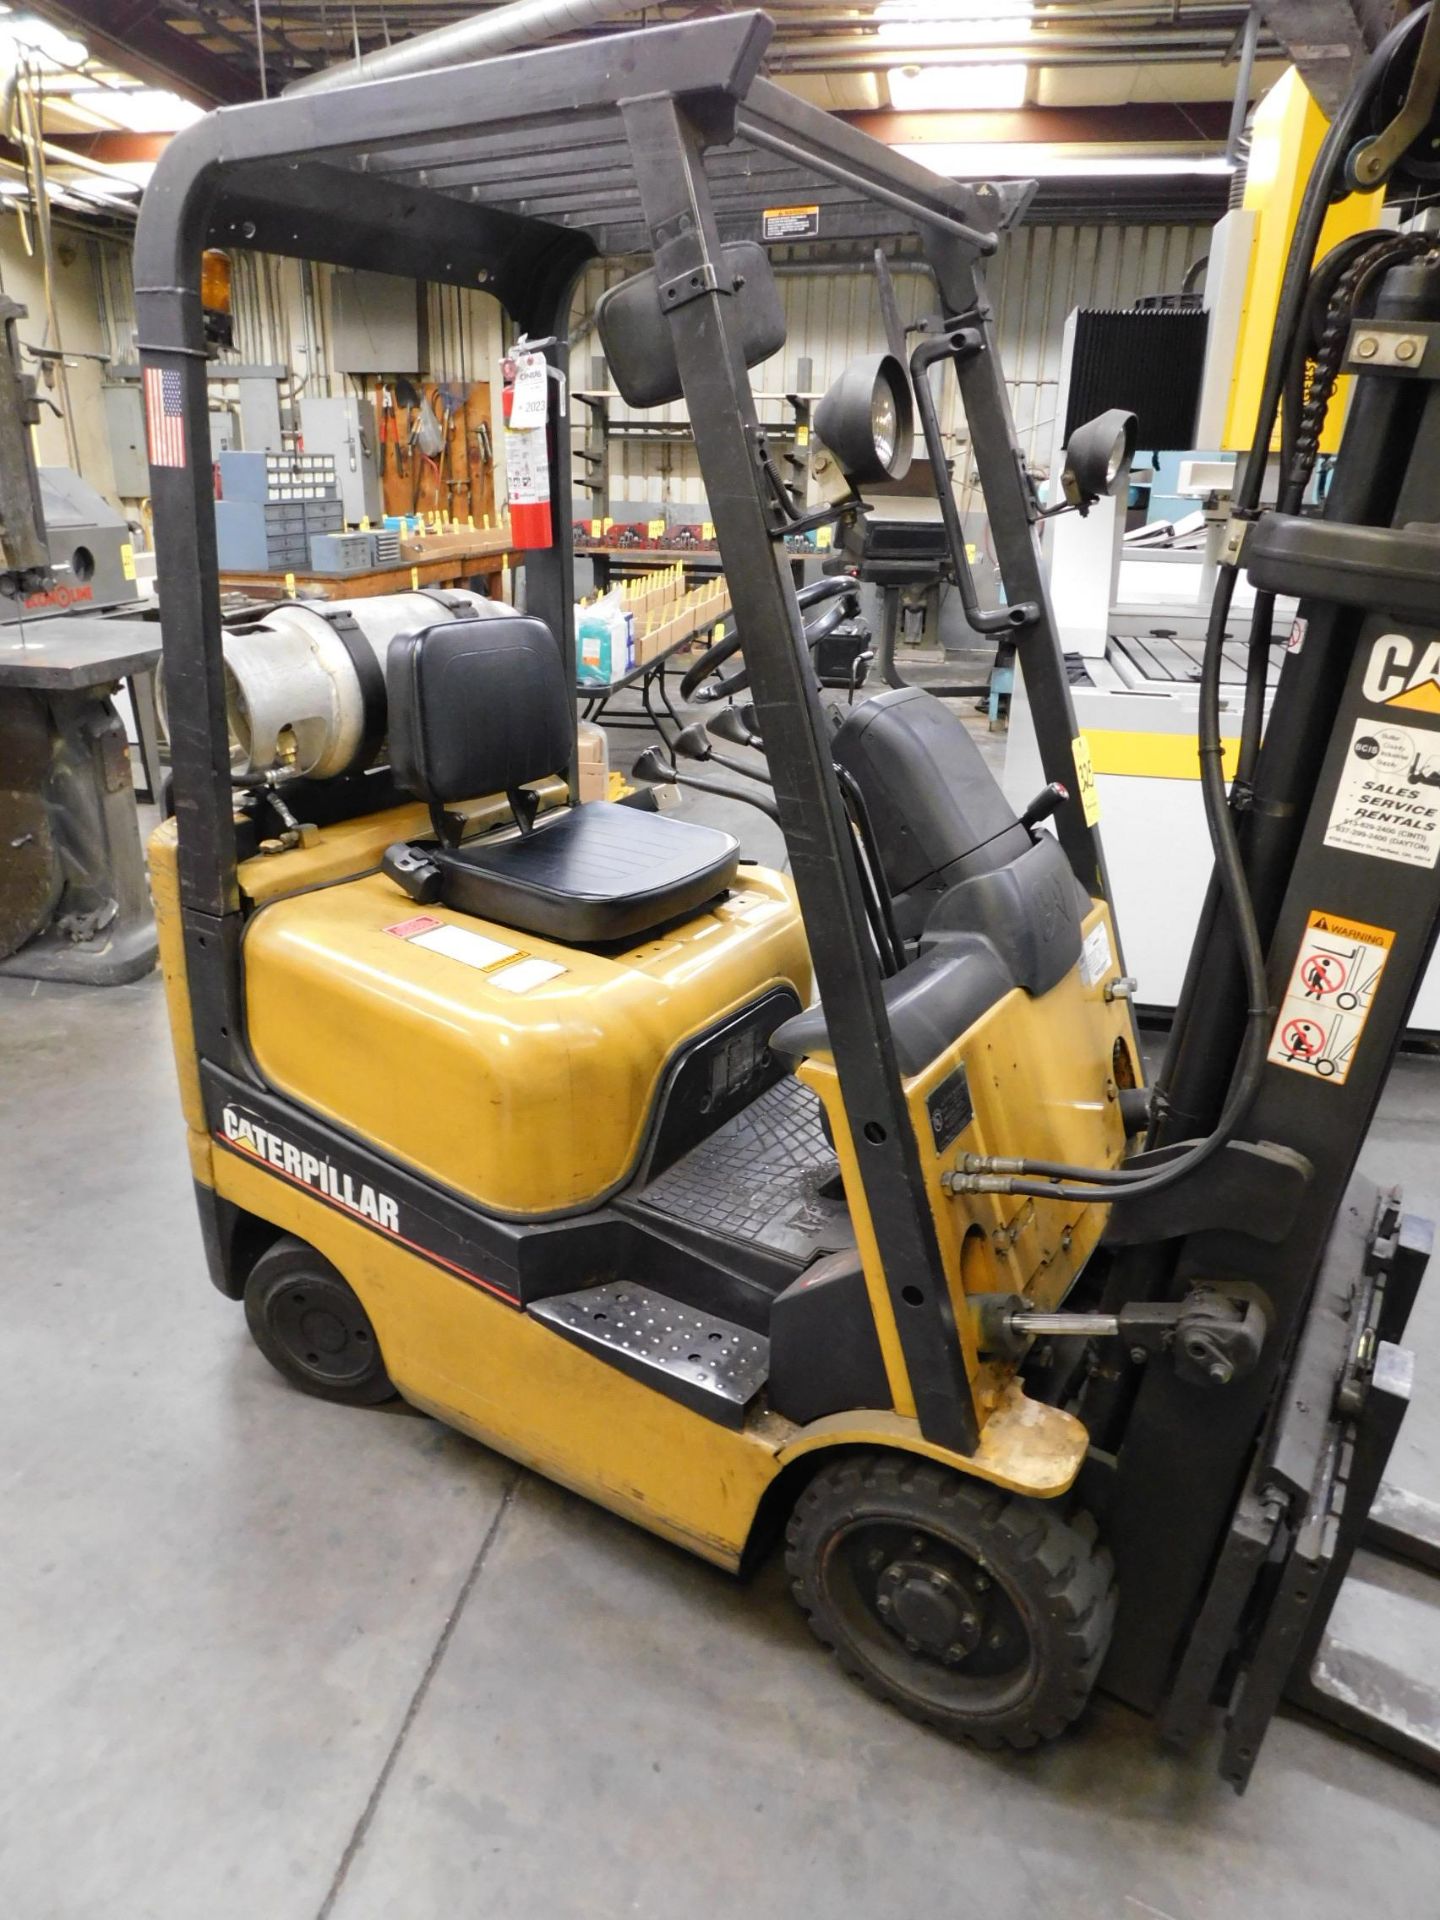 Caterpillar Model GC15K Forklift, s/n AT81C03542, 3,000 Lb. Capacity, LP, Hard Tire, Cage, 3-Stage - Image 2 of 11